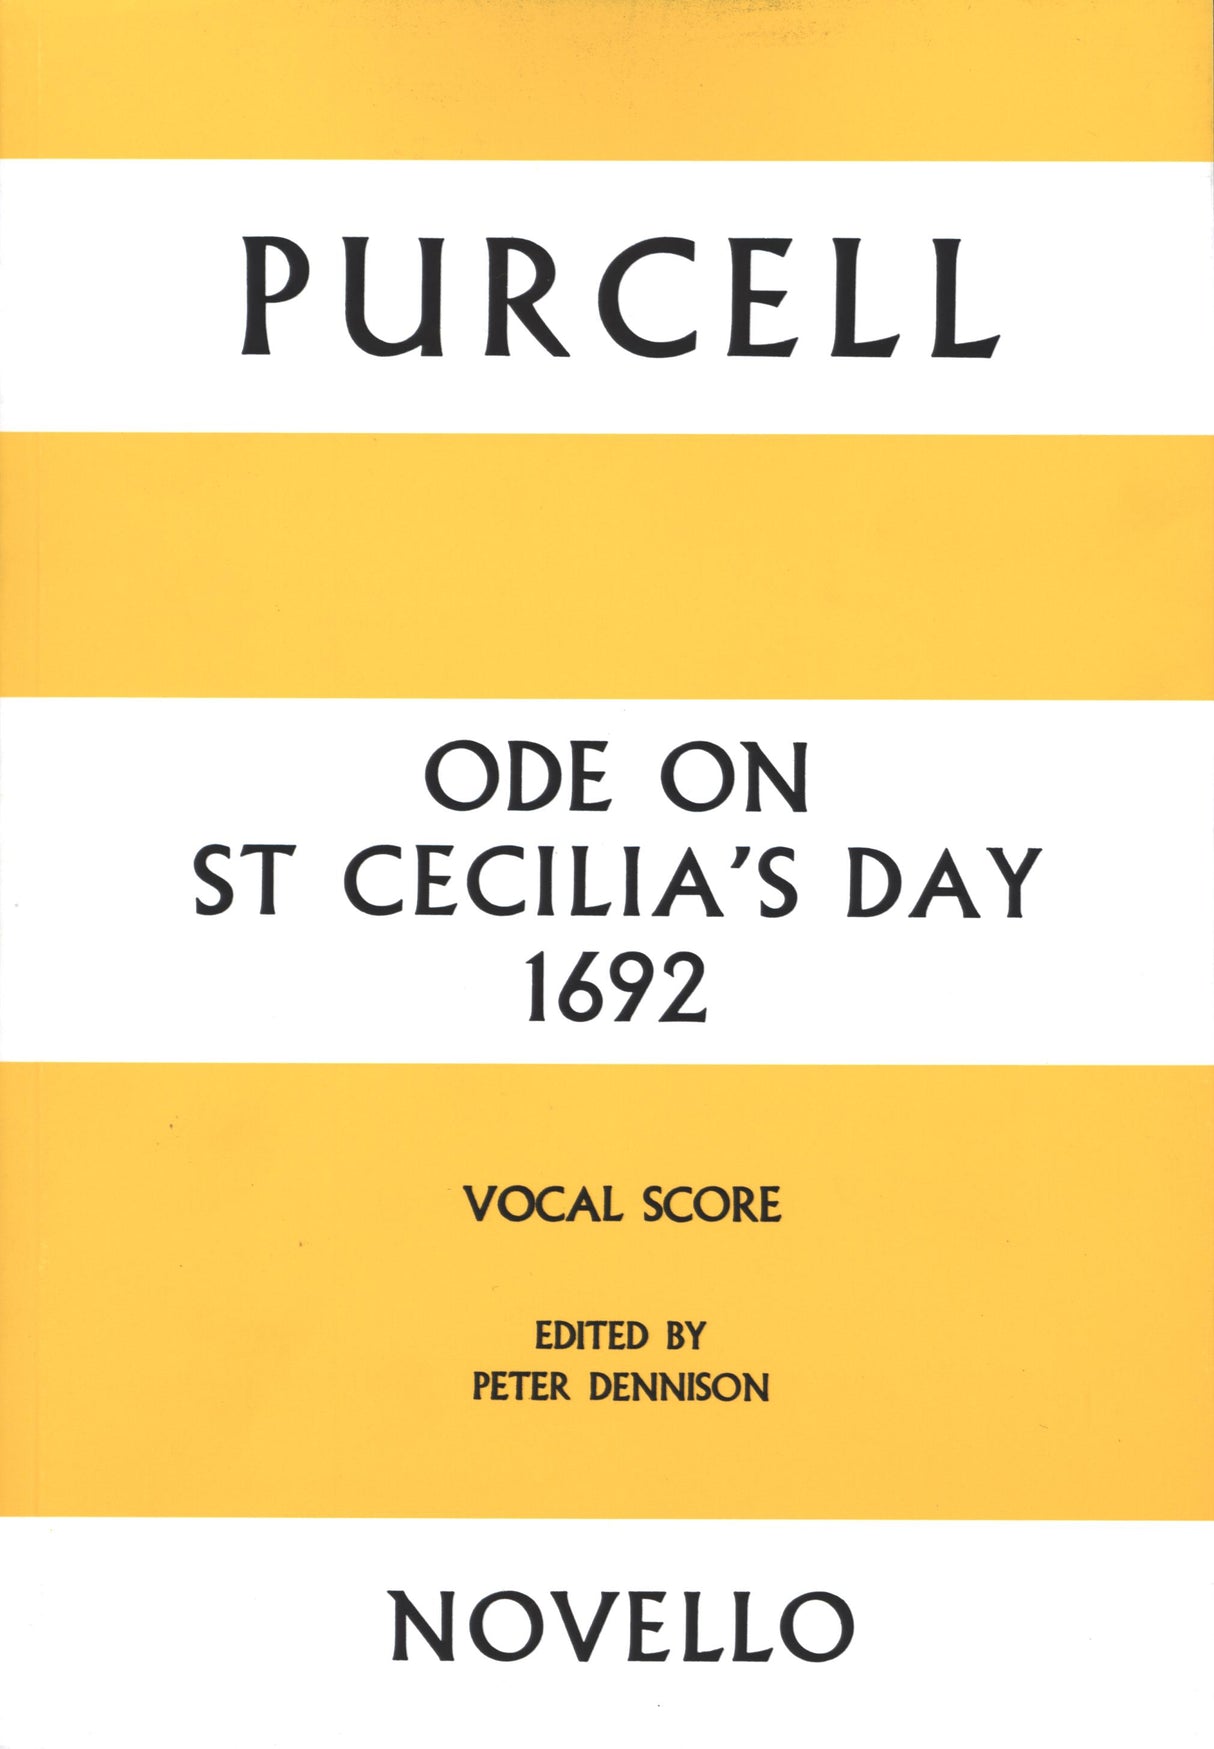 Purcell: Ode on St Cecilia's Day